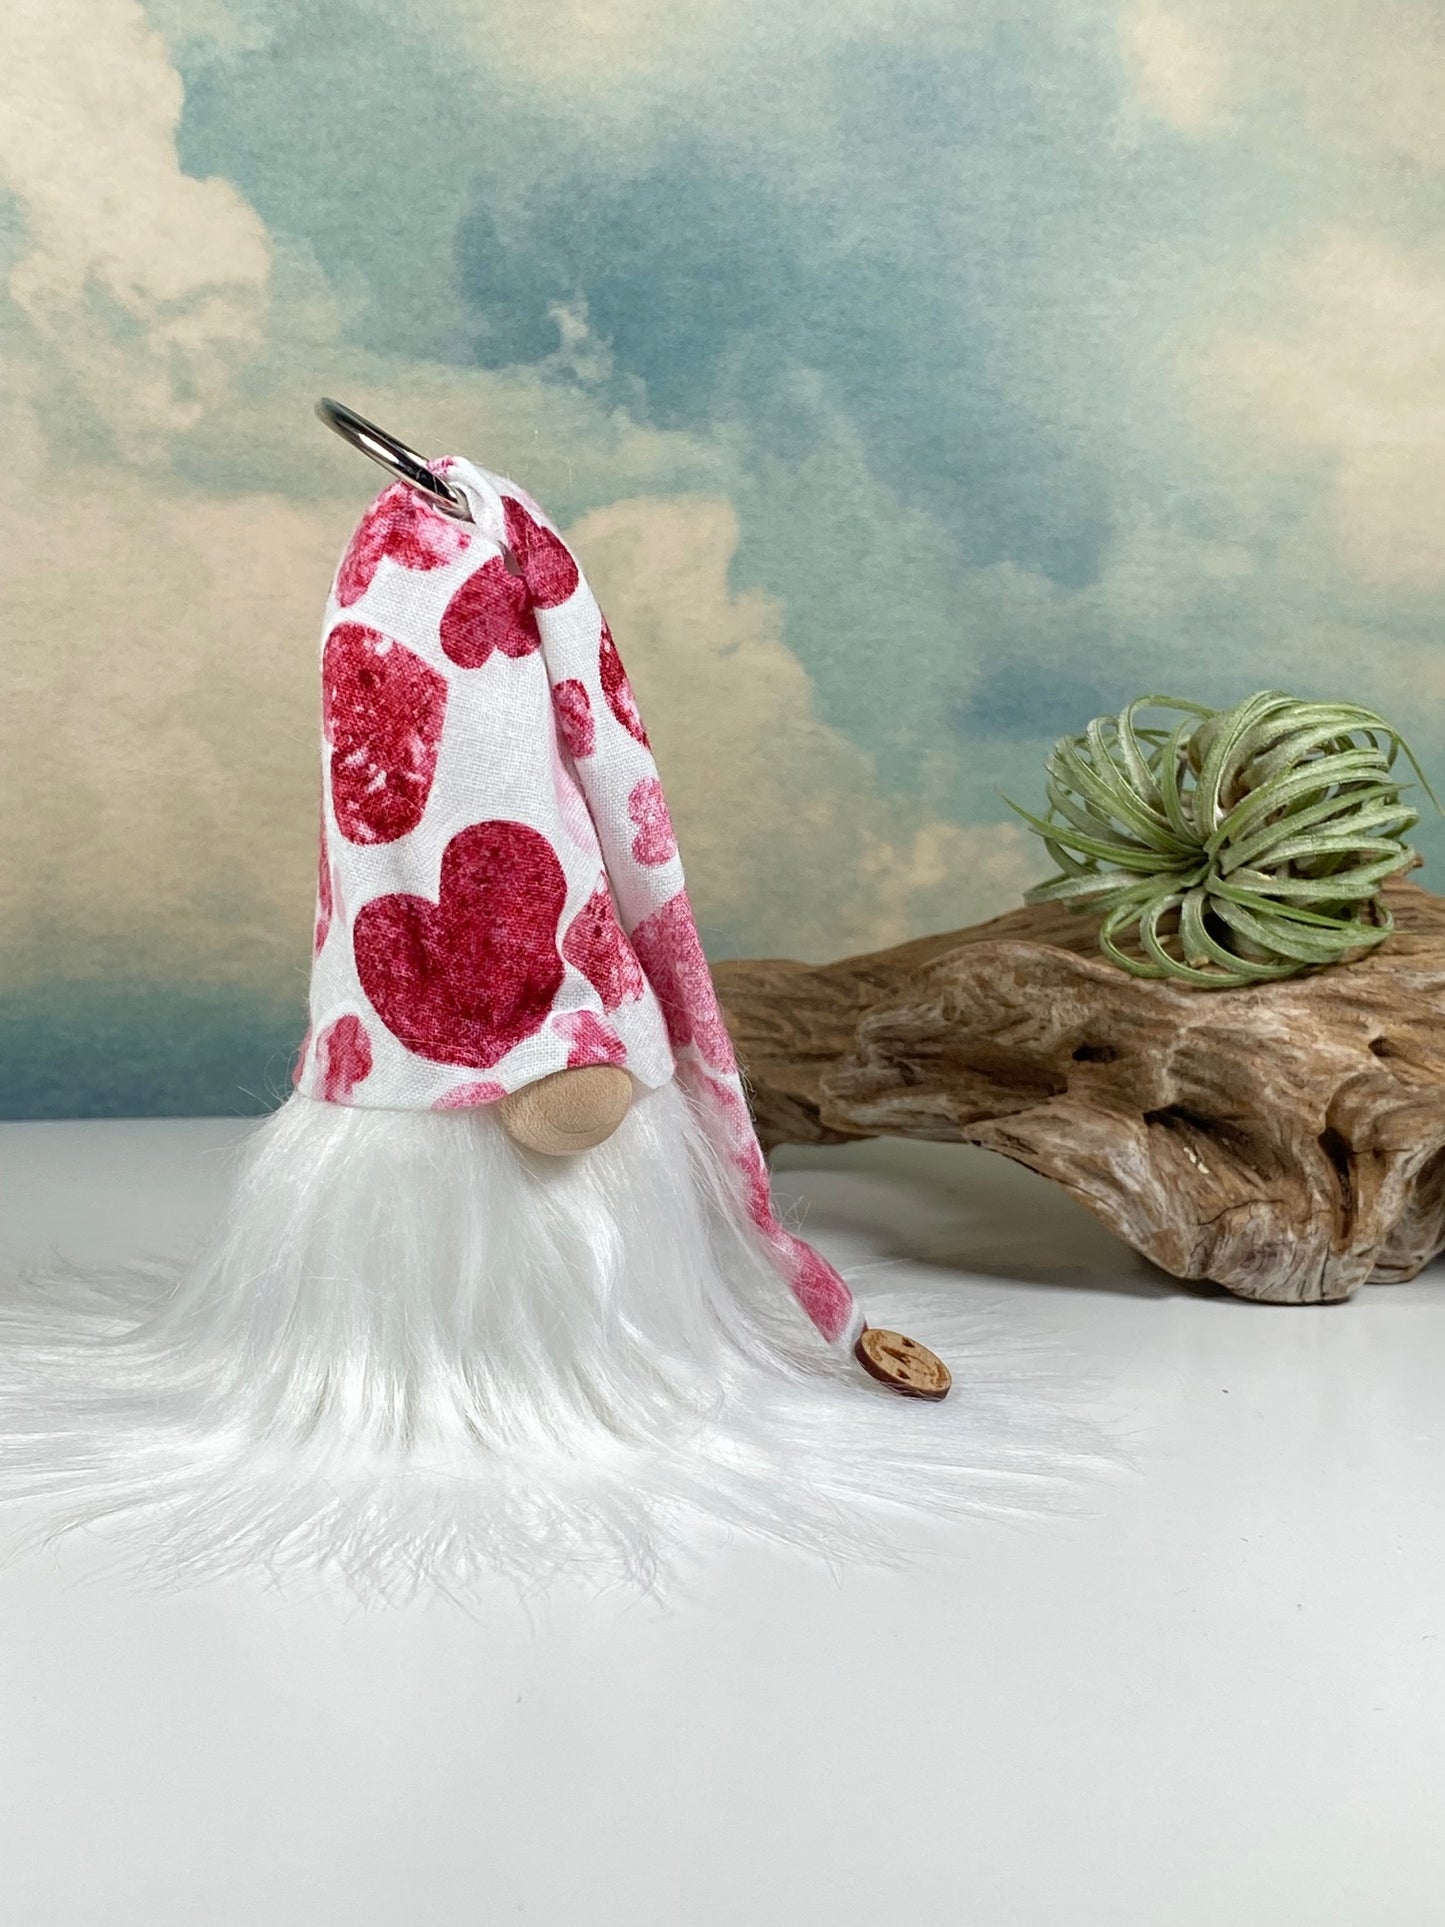 Gulfport Gnome™ - Pink and Red Hearts Decor Gnome - Limited Edition Gnome